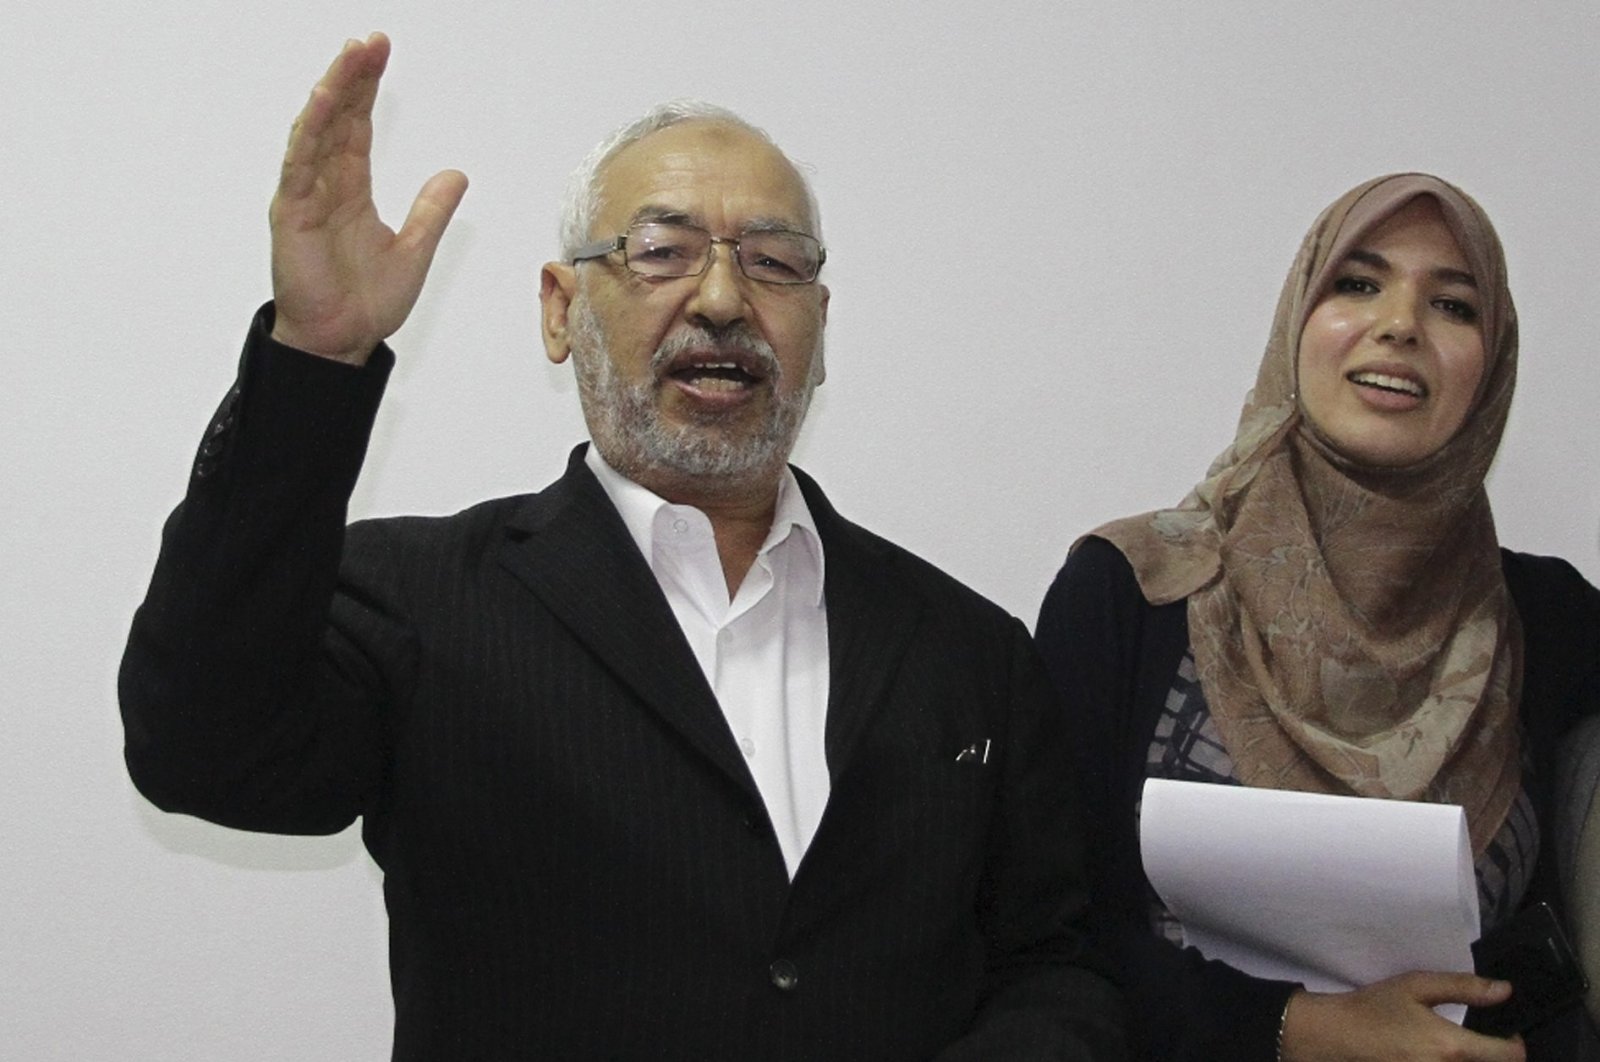 Rashid al-Ghannushi, Tunisian leader and founder of the moderate party Ennahda, celebrates an electoral victory with his daughter at the party's headquarters in Tunis, Tunisia, Oct. 27, 2011. (AP Photo)